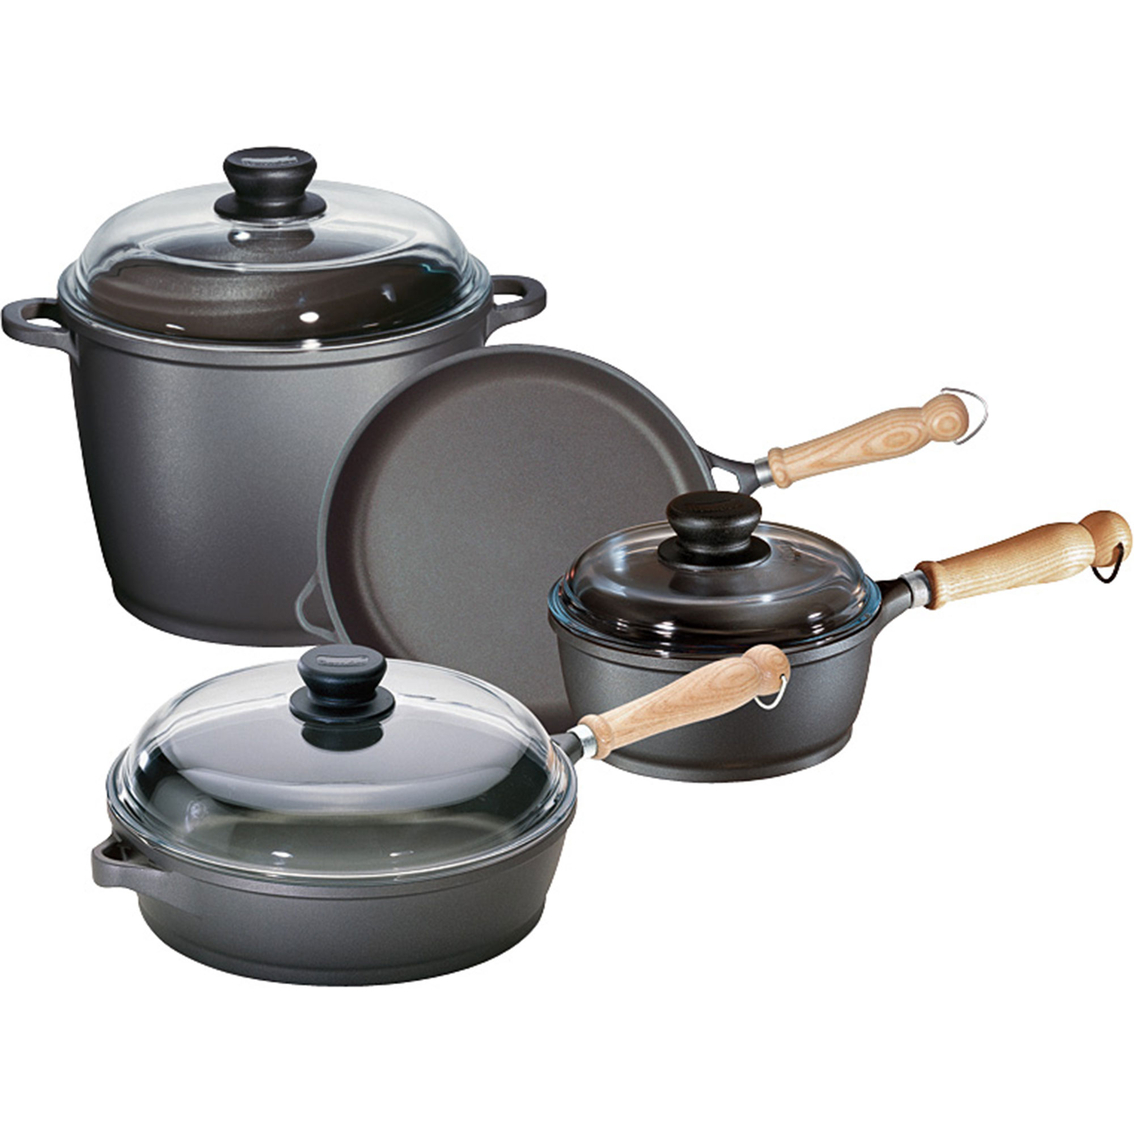 Berndes Tradition 7 Pc. Cookware Set, Non-stick, Household